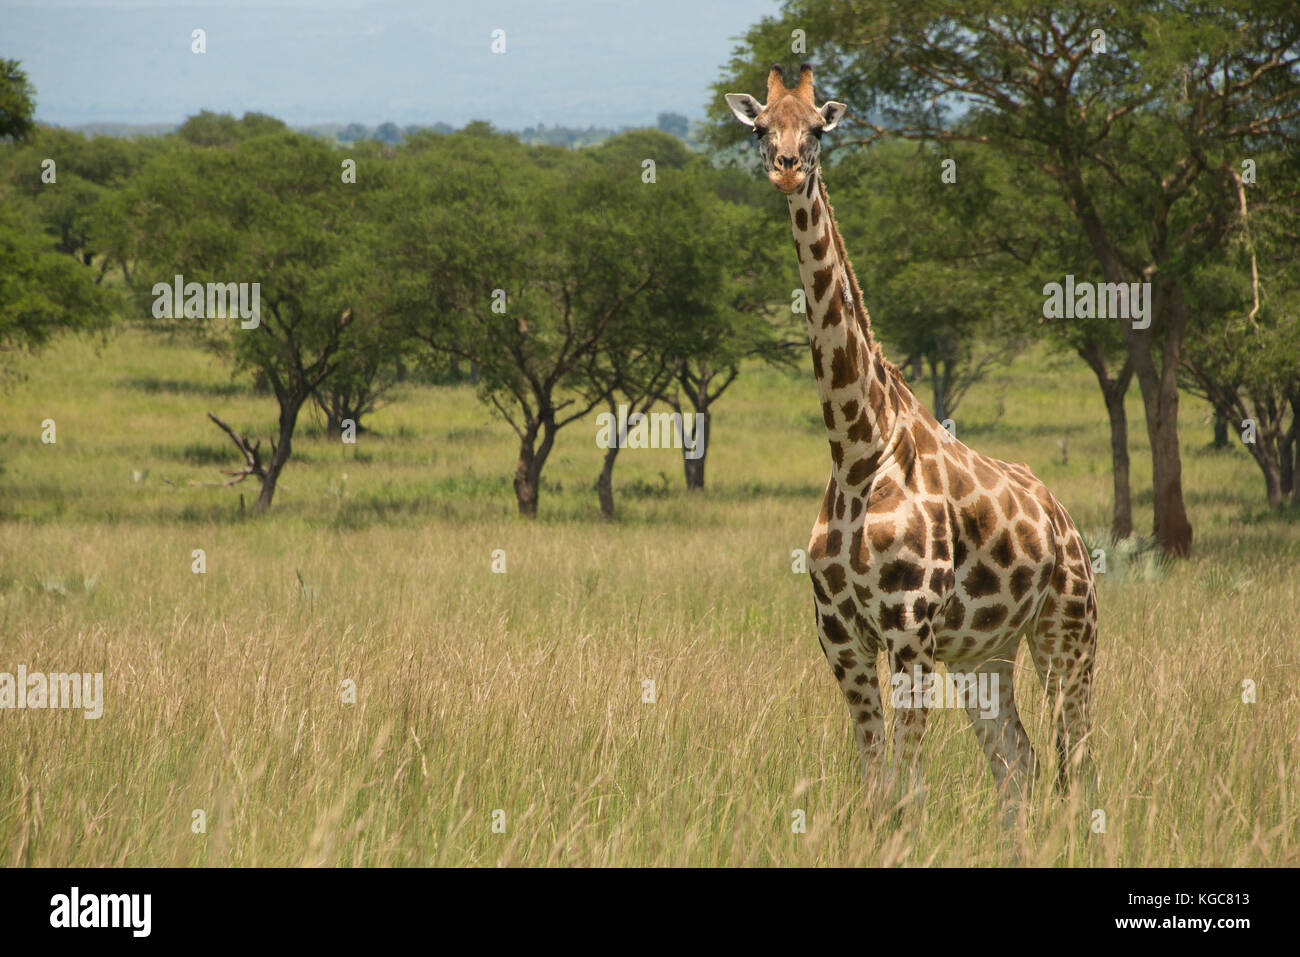 Rothschild's giraffe, an Endangered subspecies found in only two Parks; Murchison Falls National Park, Uganda. Stock Photo